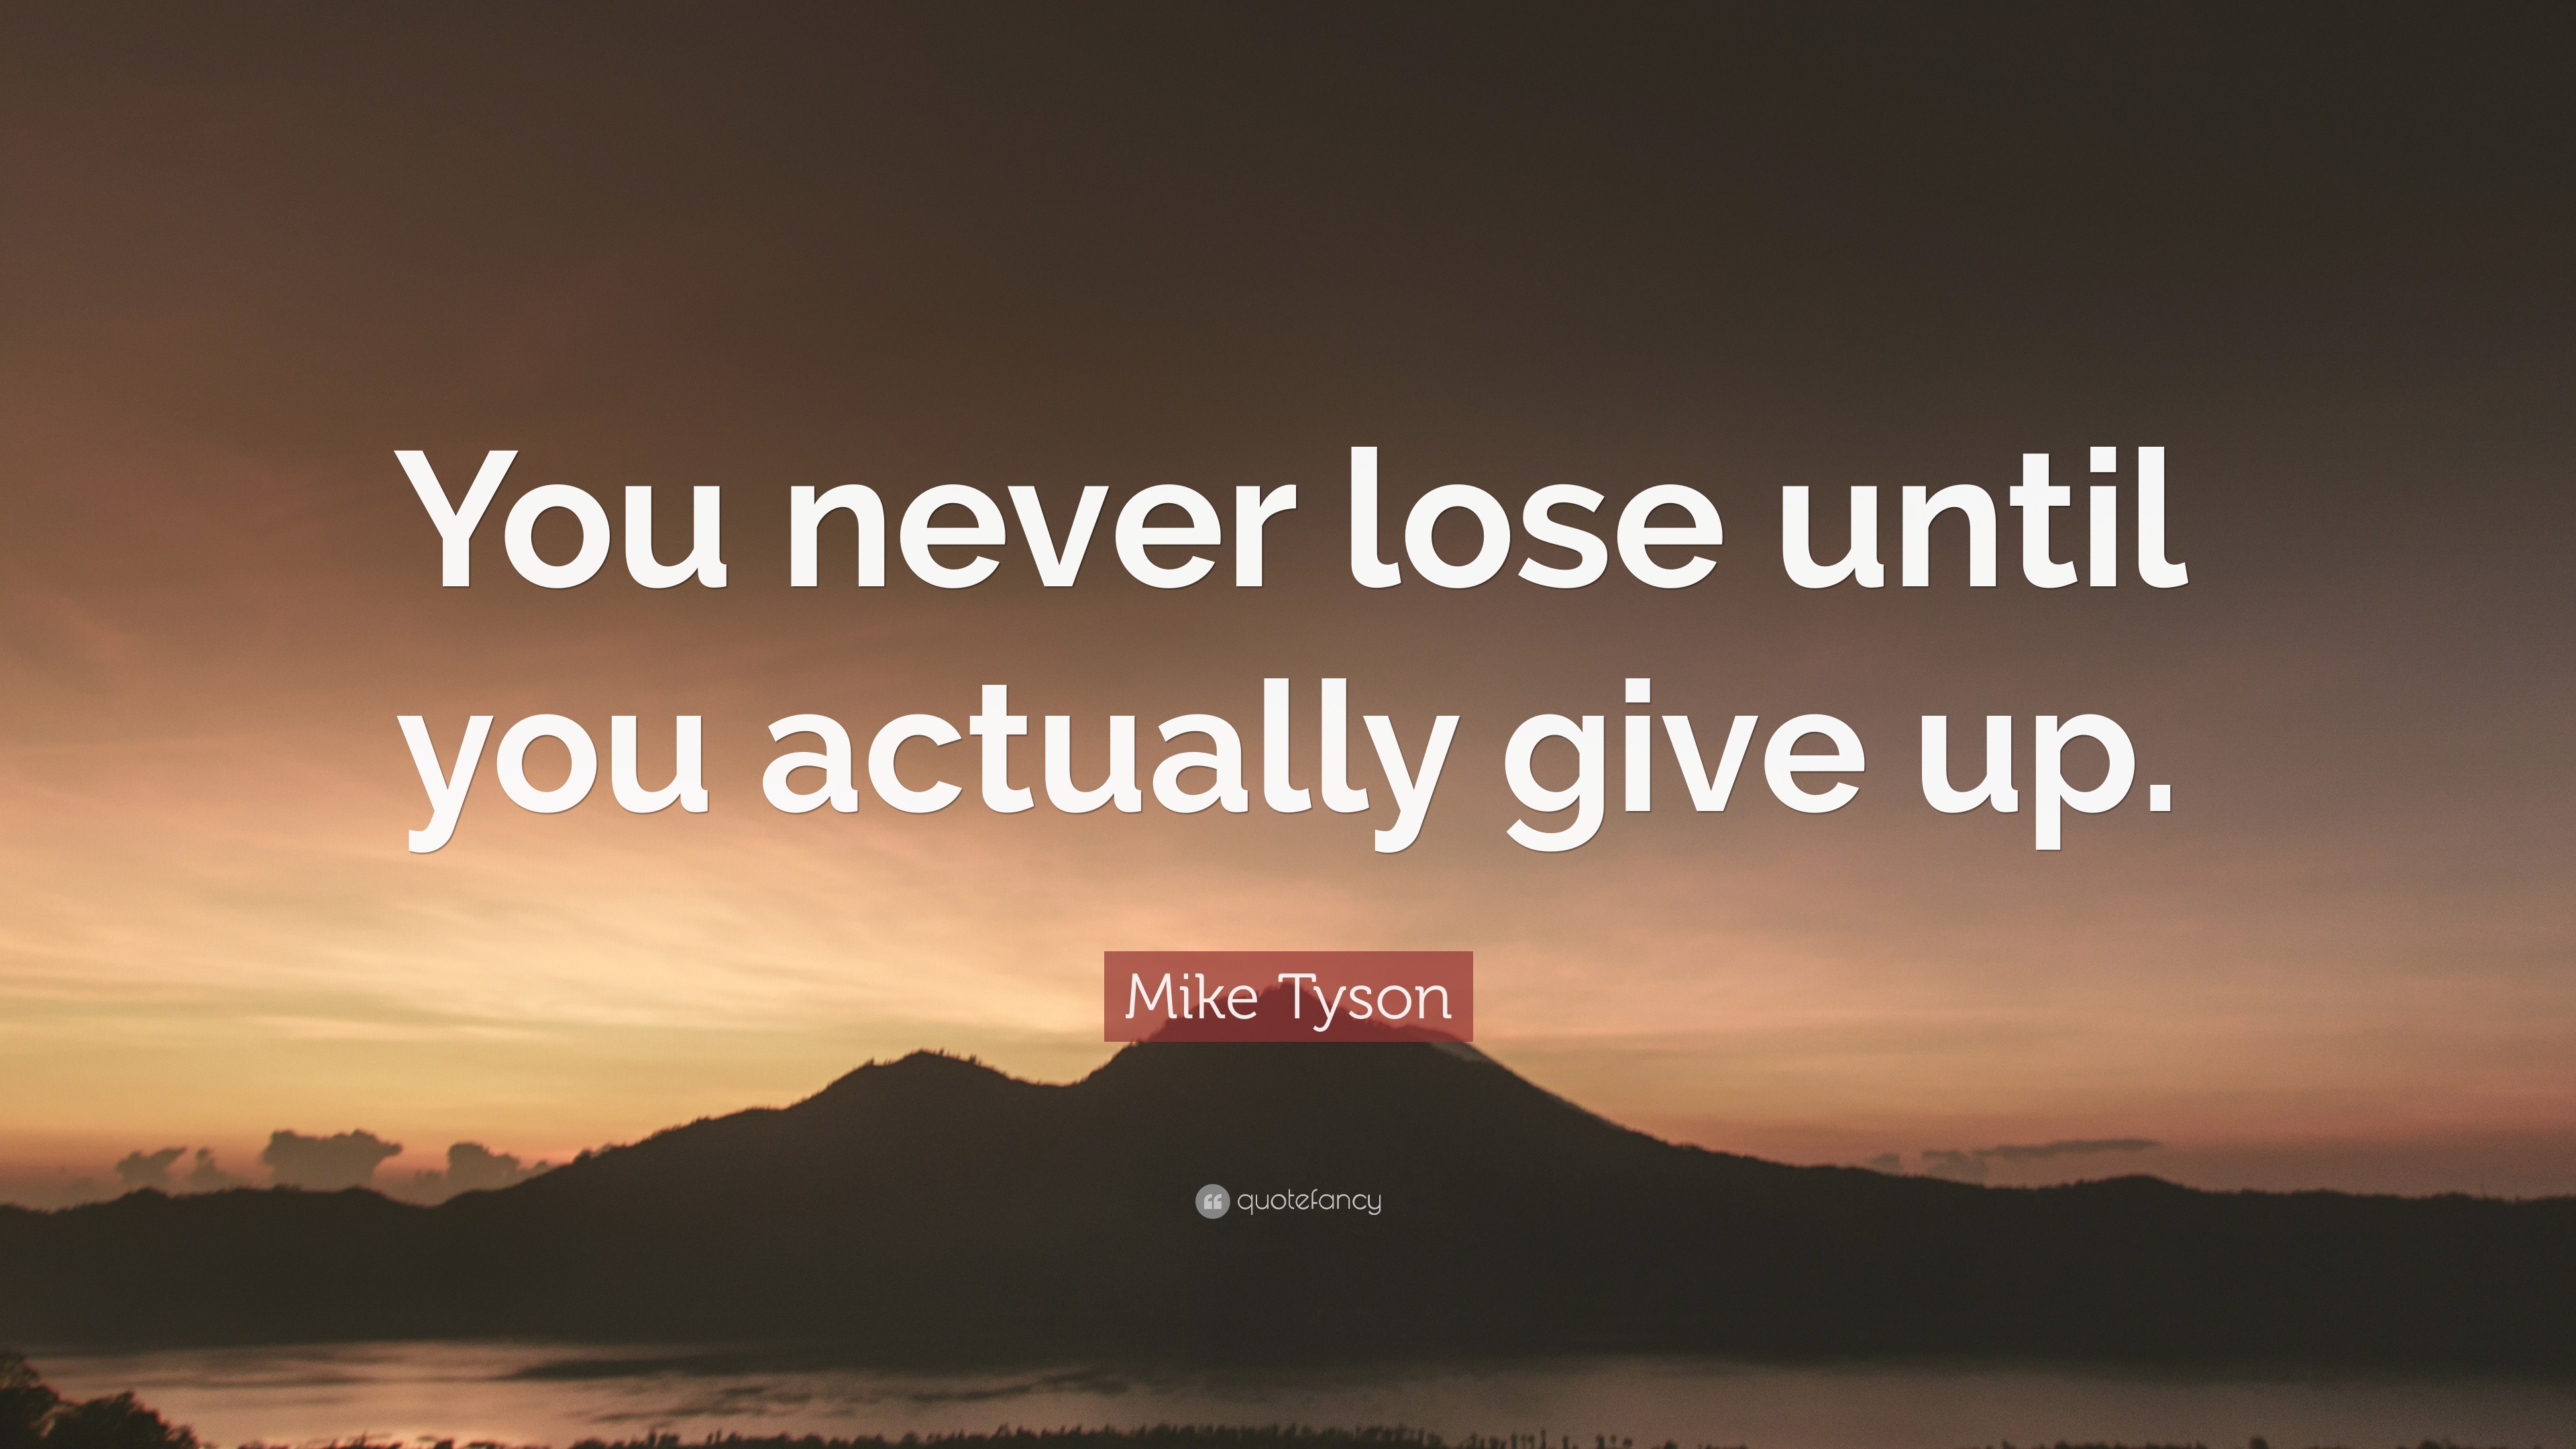 Mike Tyson Quote: “You never lose until you actually give up.”